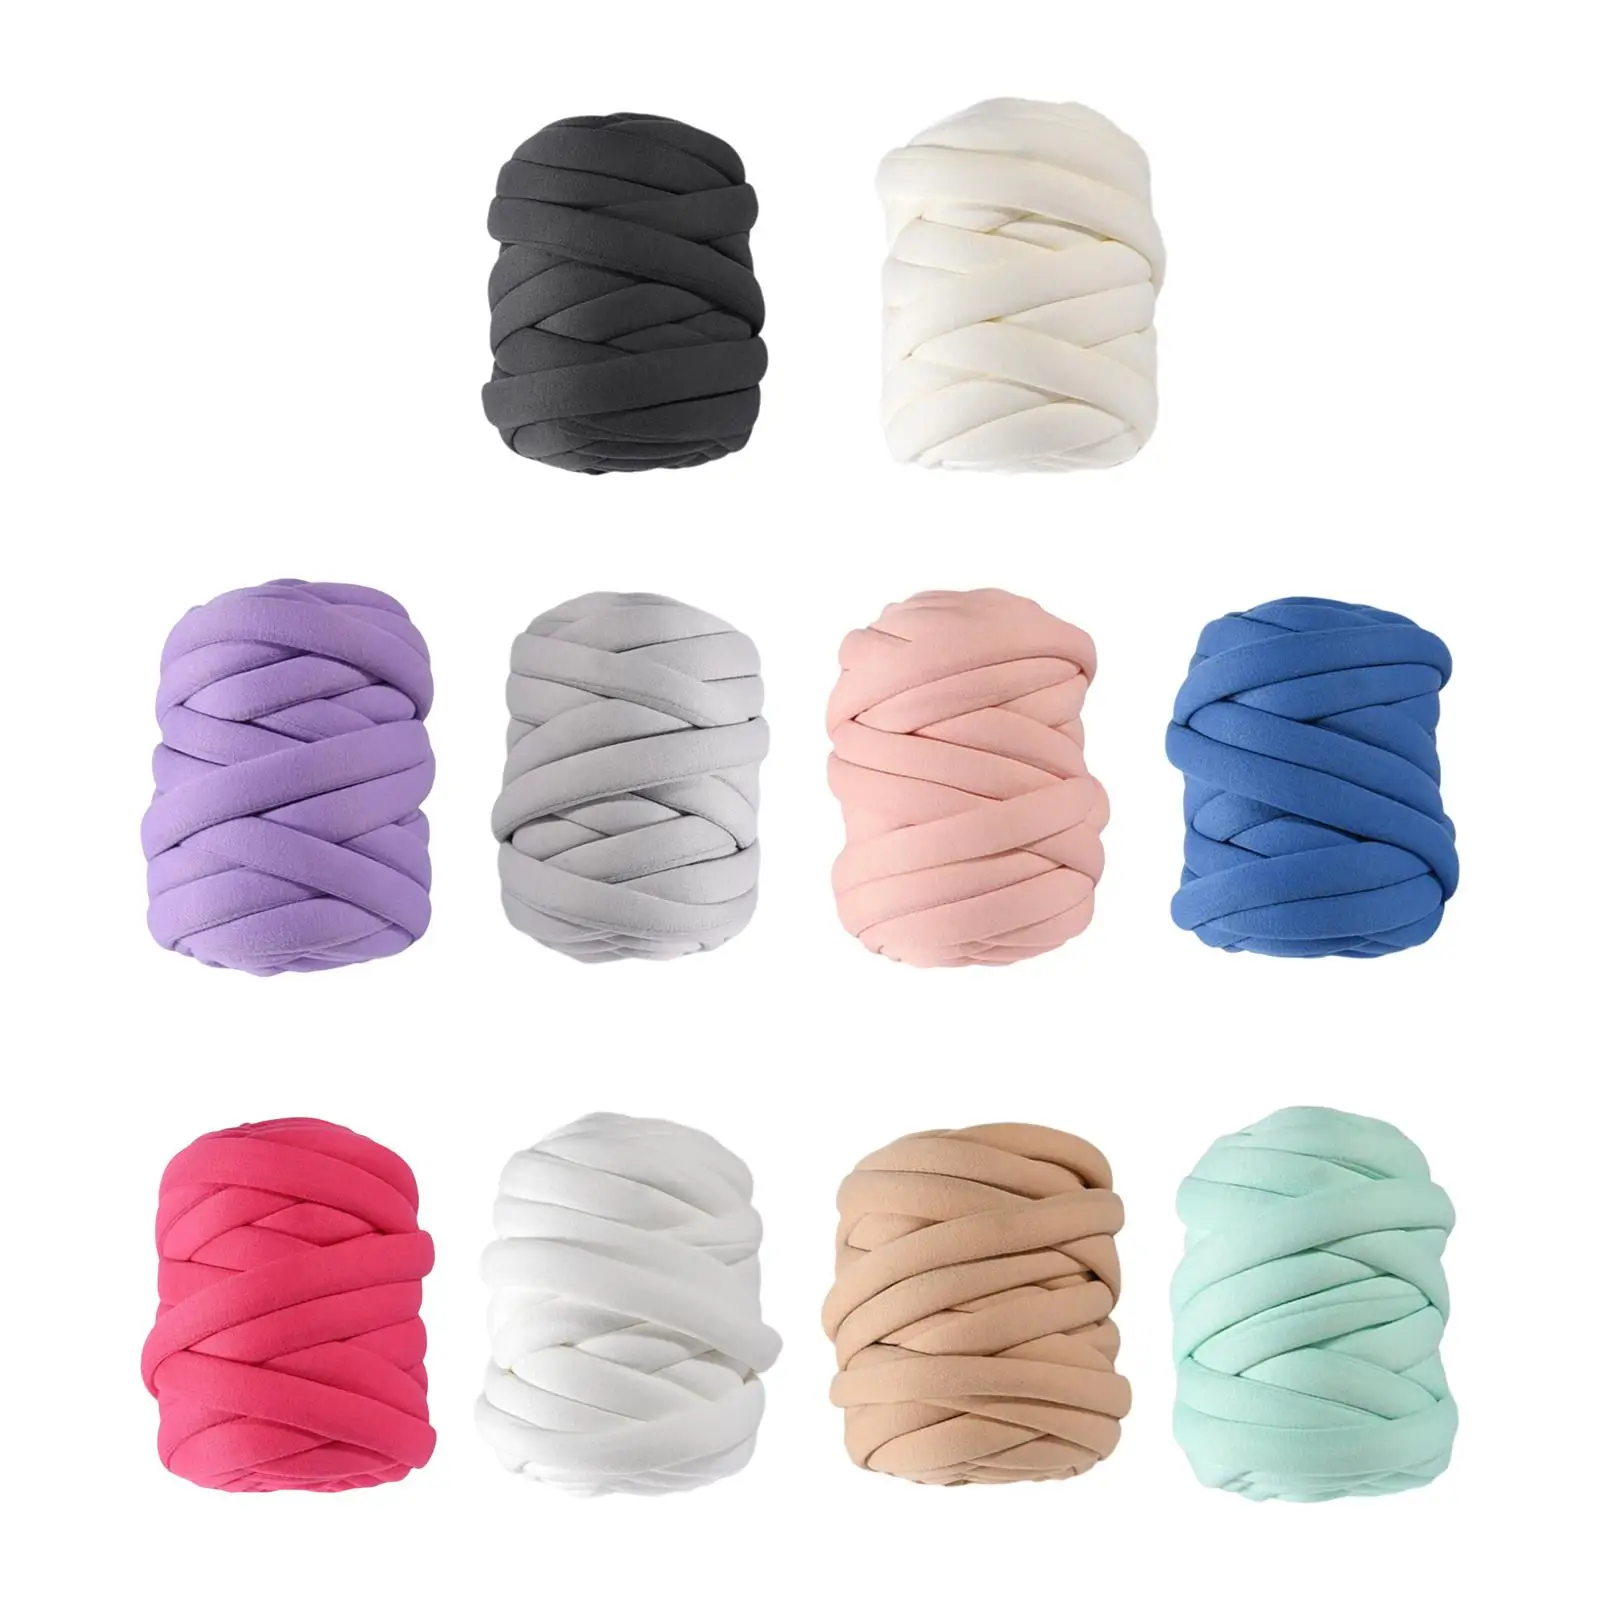 250G/0.55lbs Chunky Yarn 39.4-46ft Tube Yarn for Braided Knot Pet Bed Craft